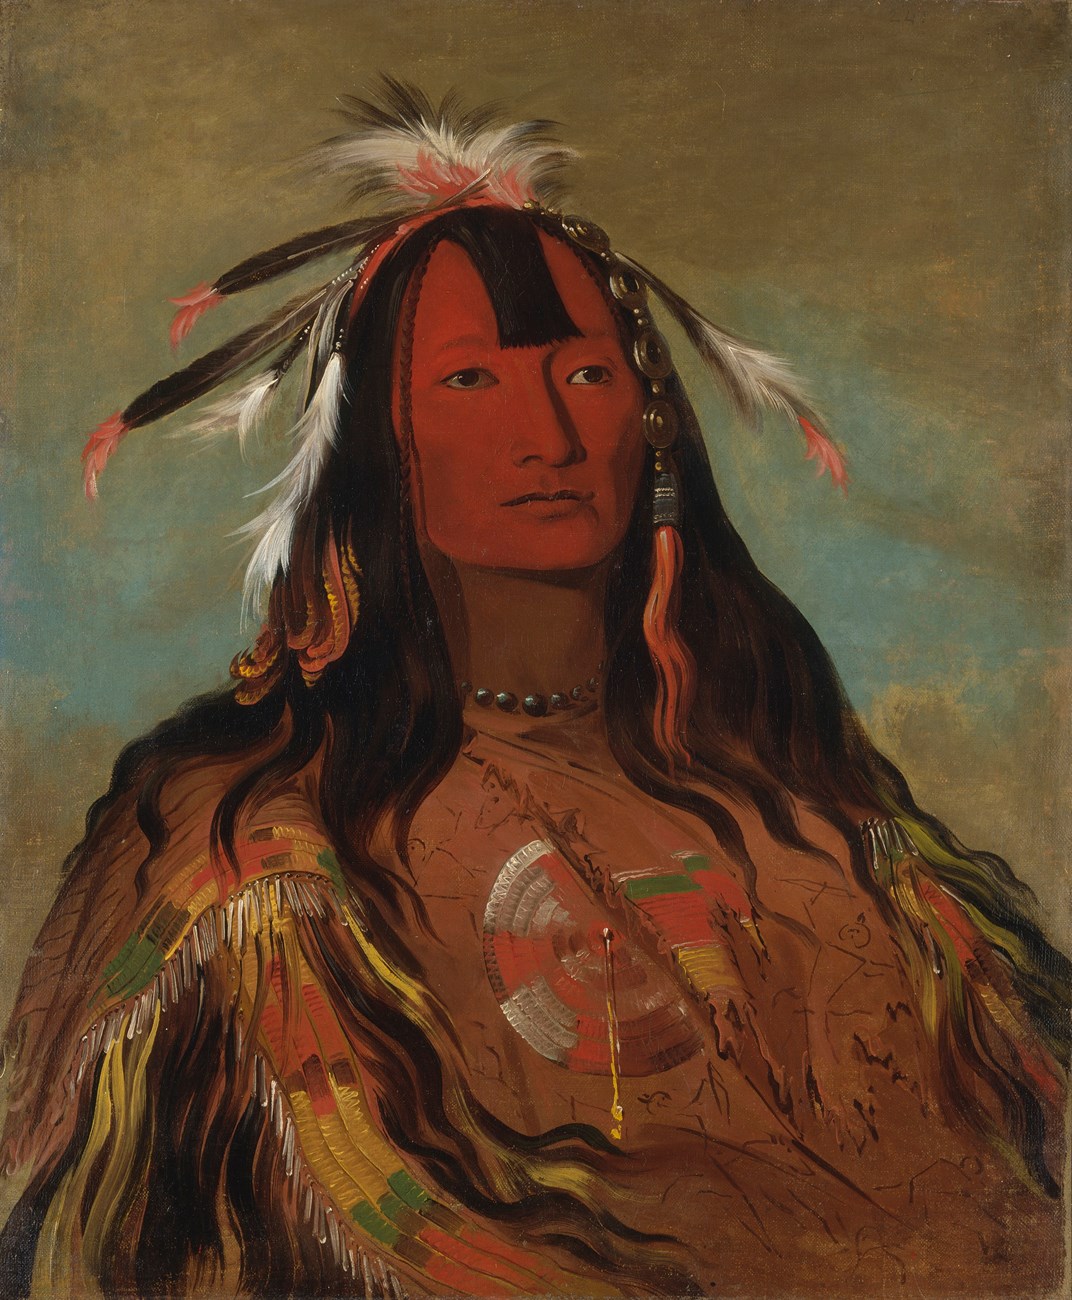 painted portrait of a native american man with feathers and other ornamentation in his hair wearing a fringed buckskin shirt with yellow, red, white, and green beadwork